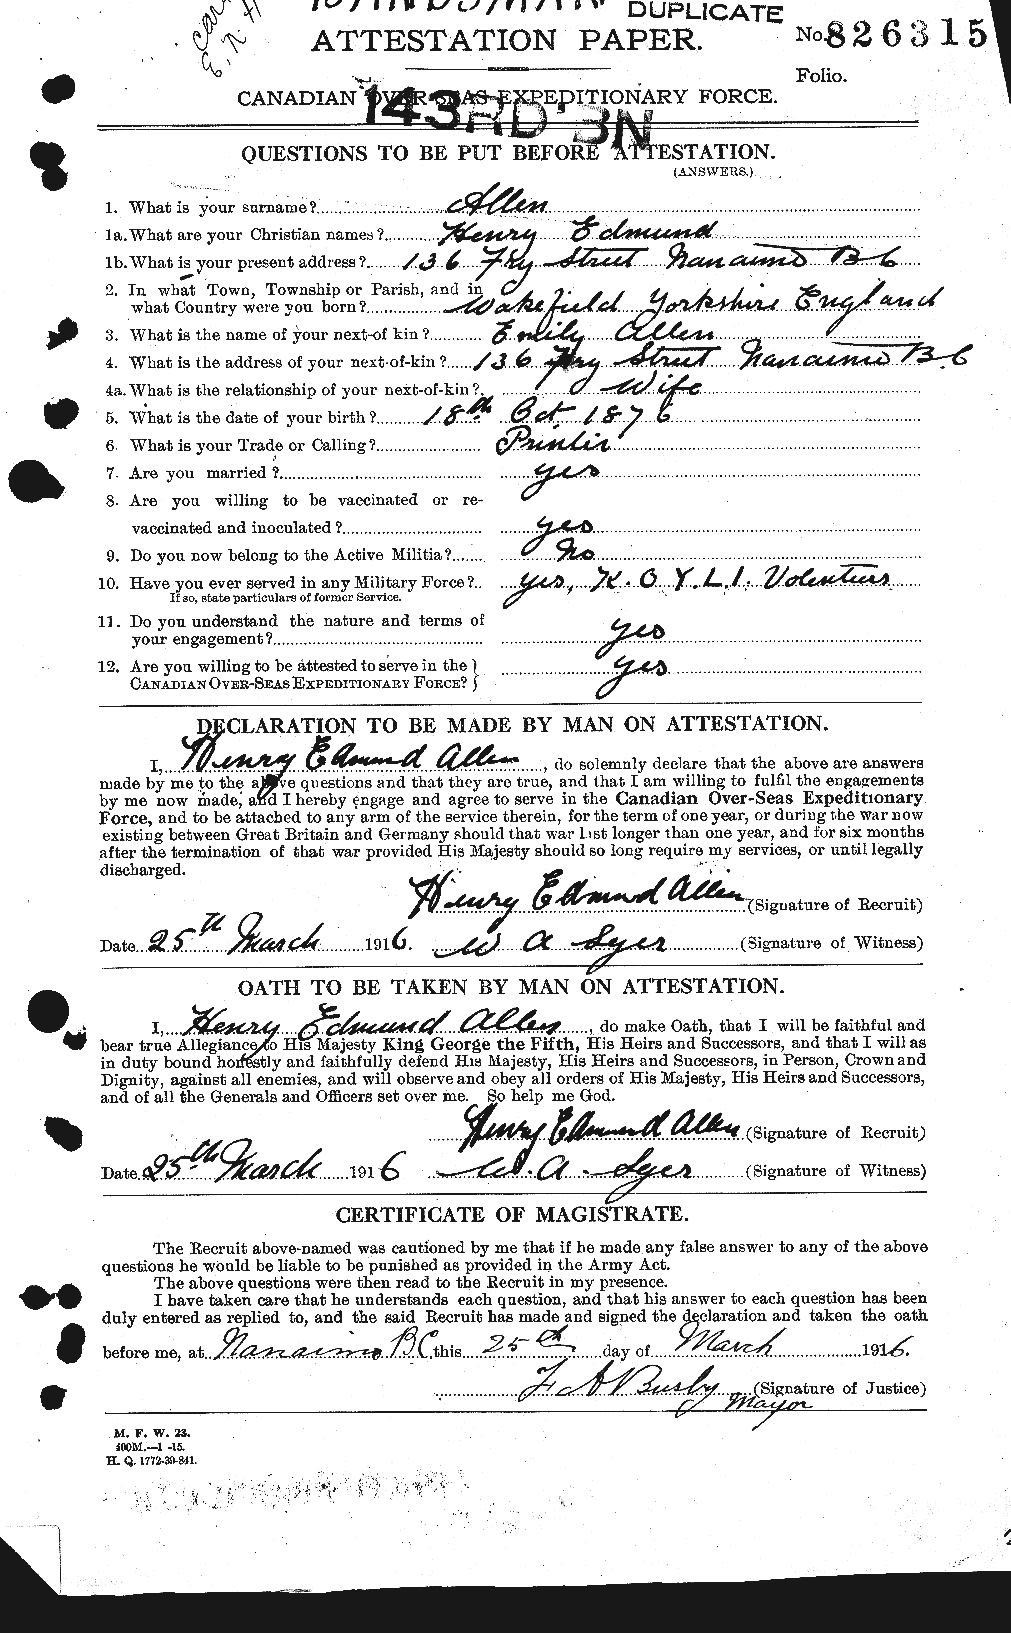 Personnel Records of the First World War - CEF 206377a